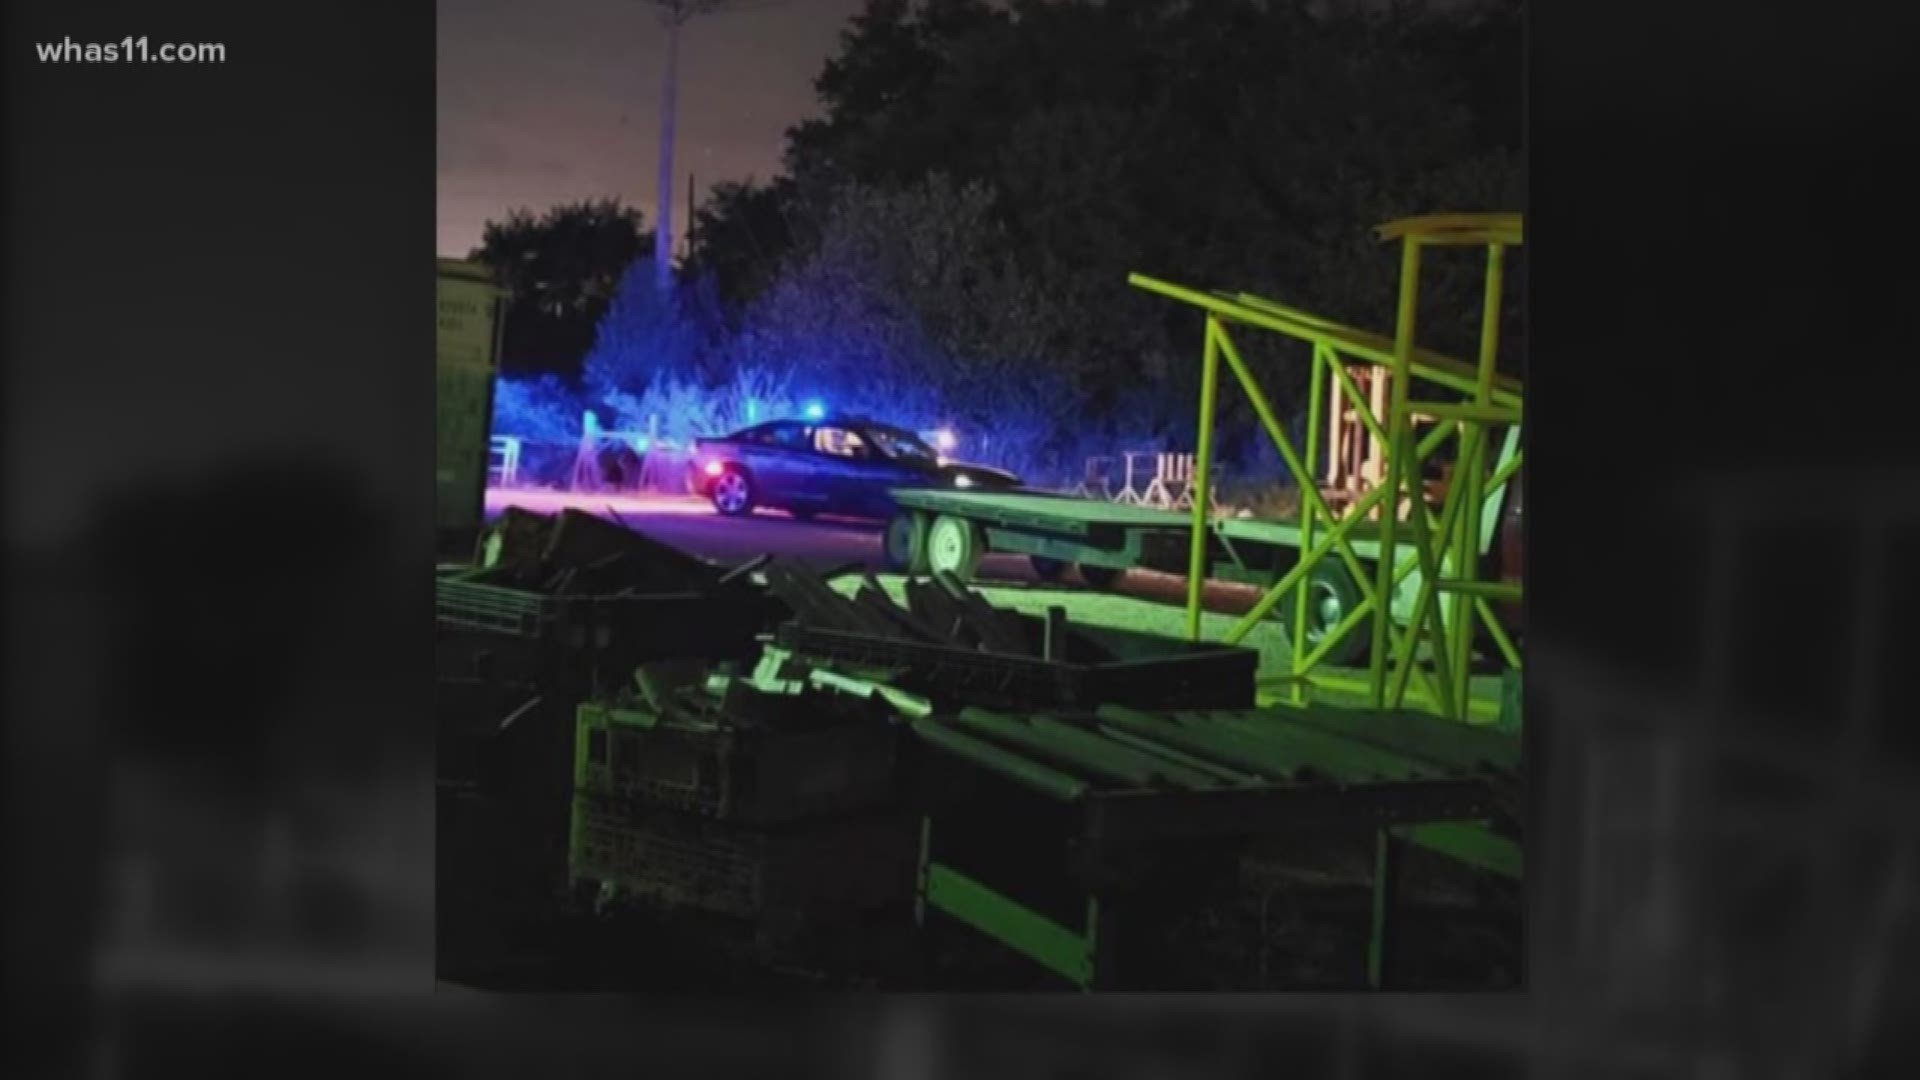 Police said a person died after being hit by a train in Shelbyville early Friday morning.